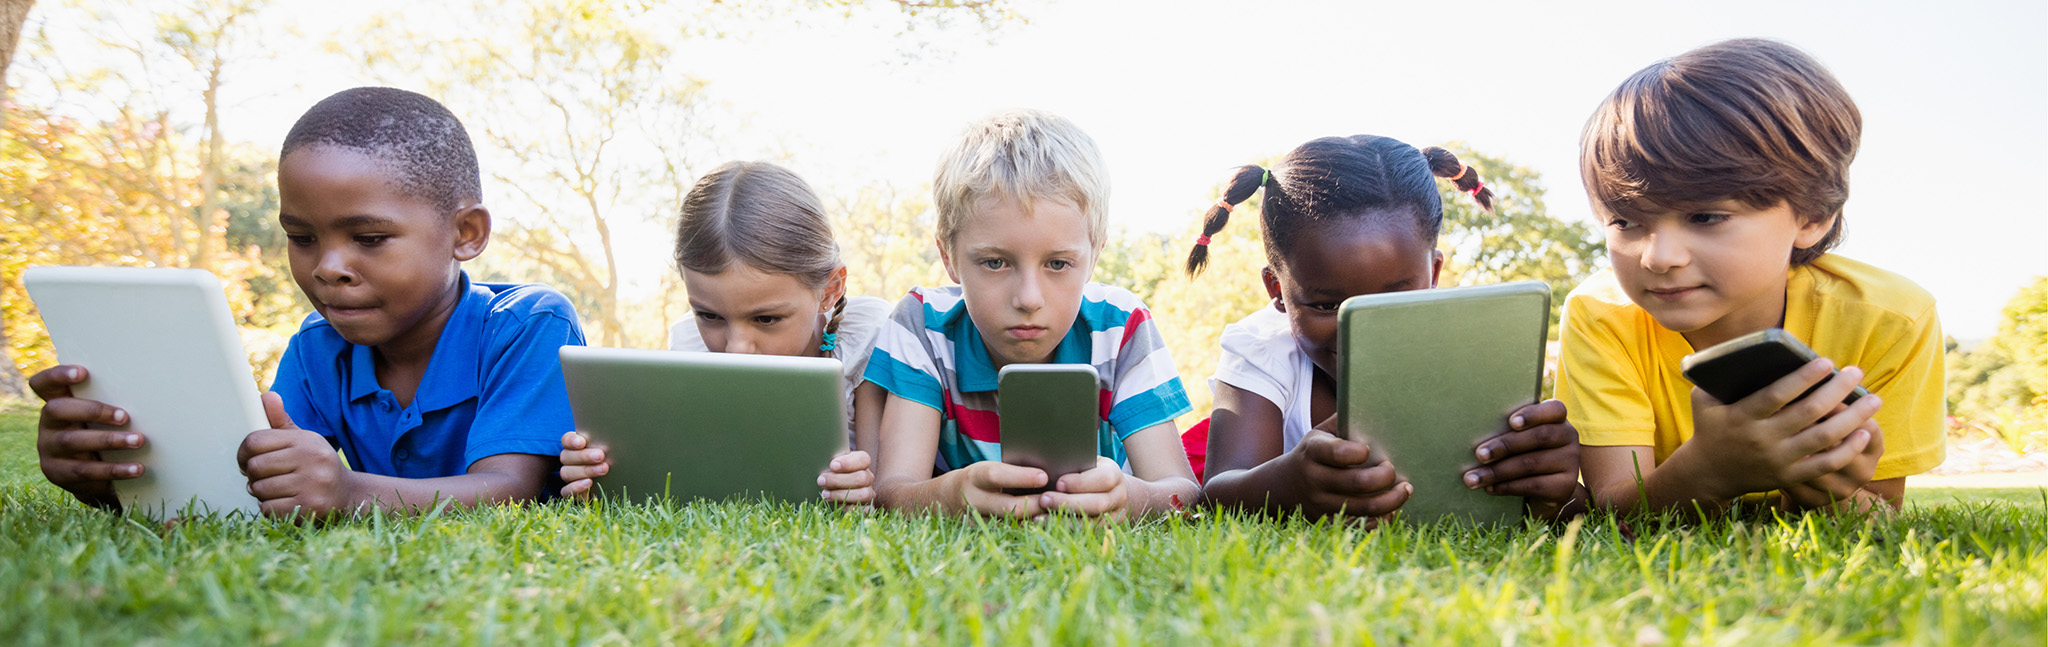 5 kids with technology on grassy lawn